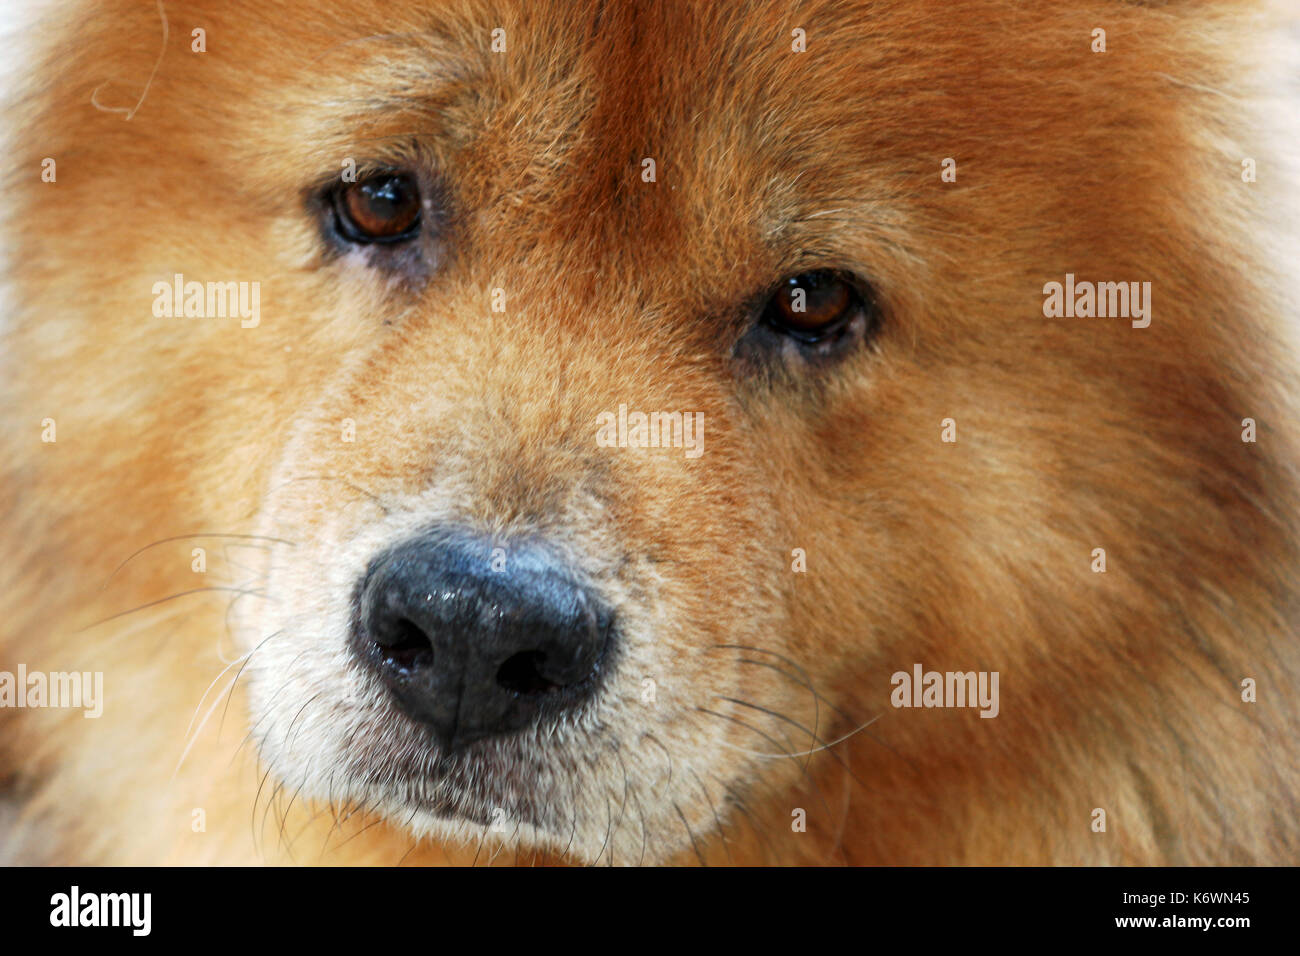 Un close up head shot of a red chinese chow chow race de chien. Banque D'Images